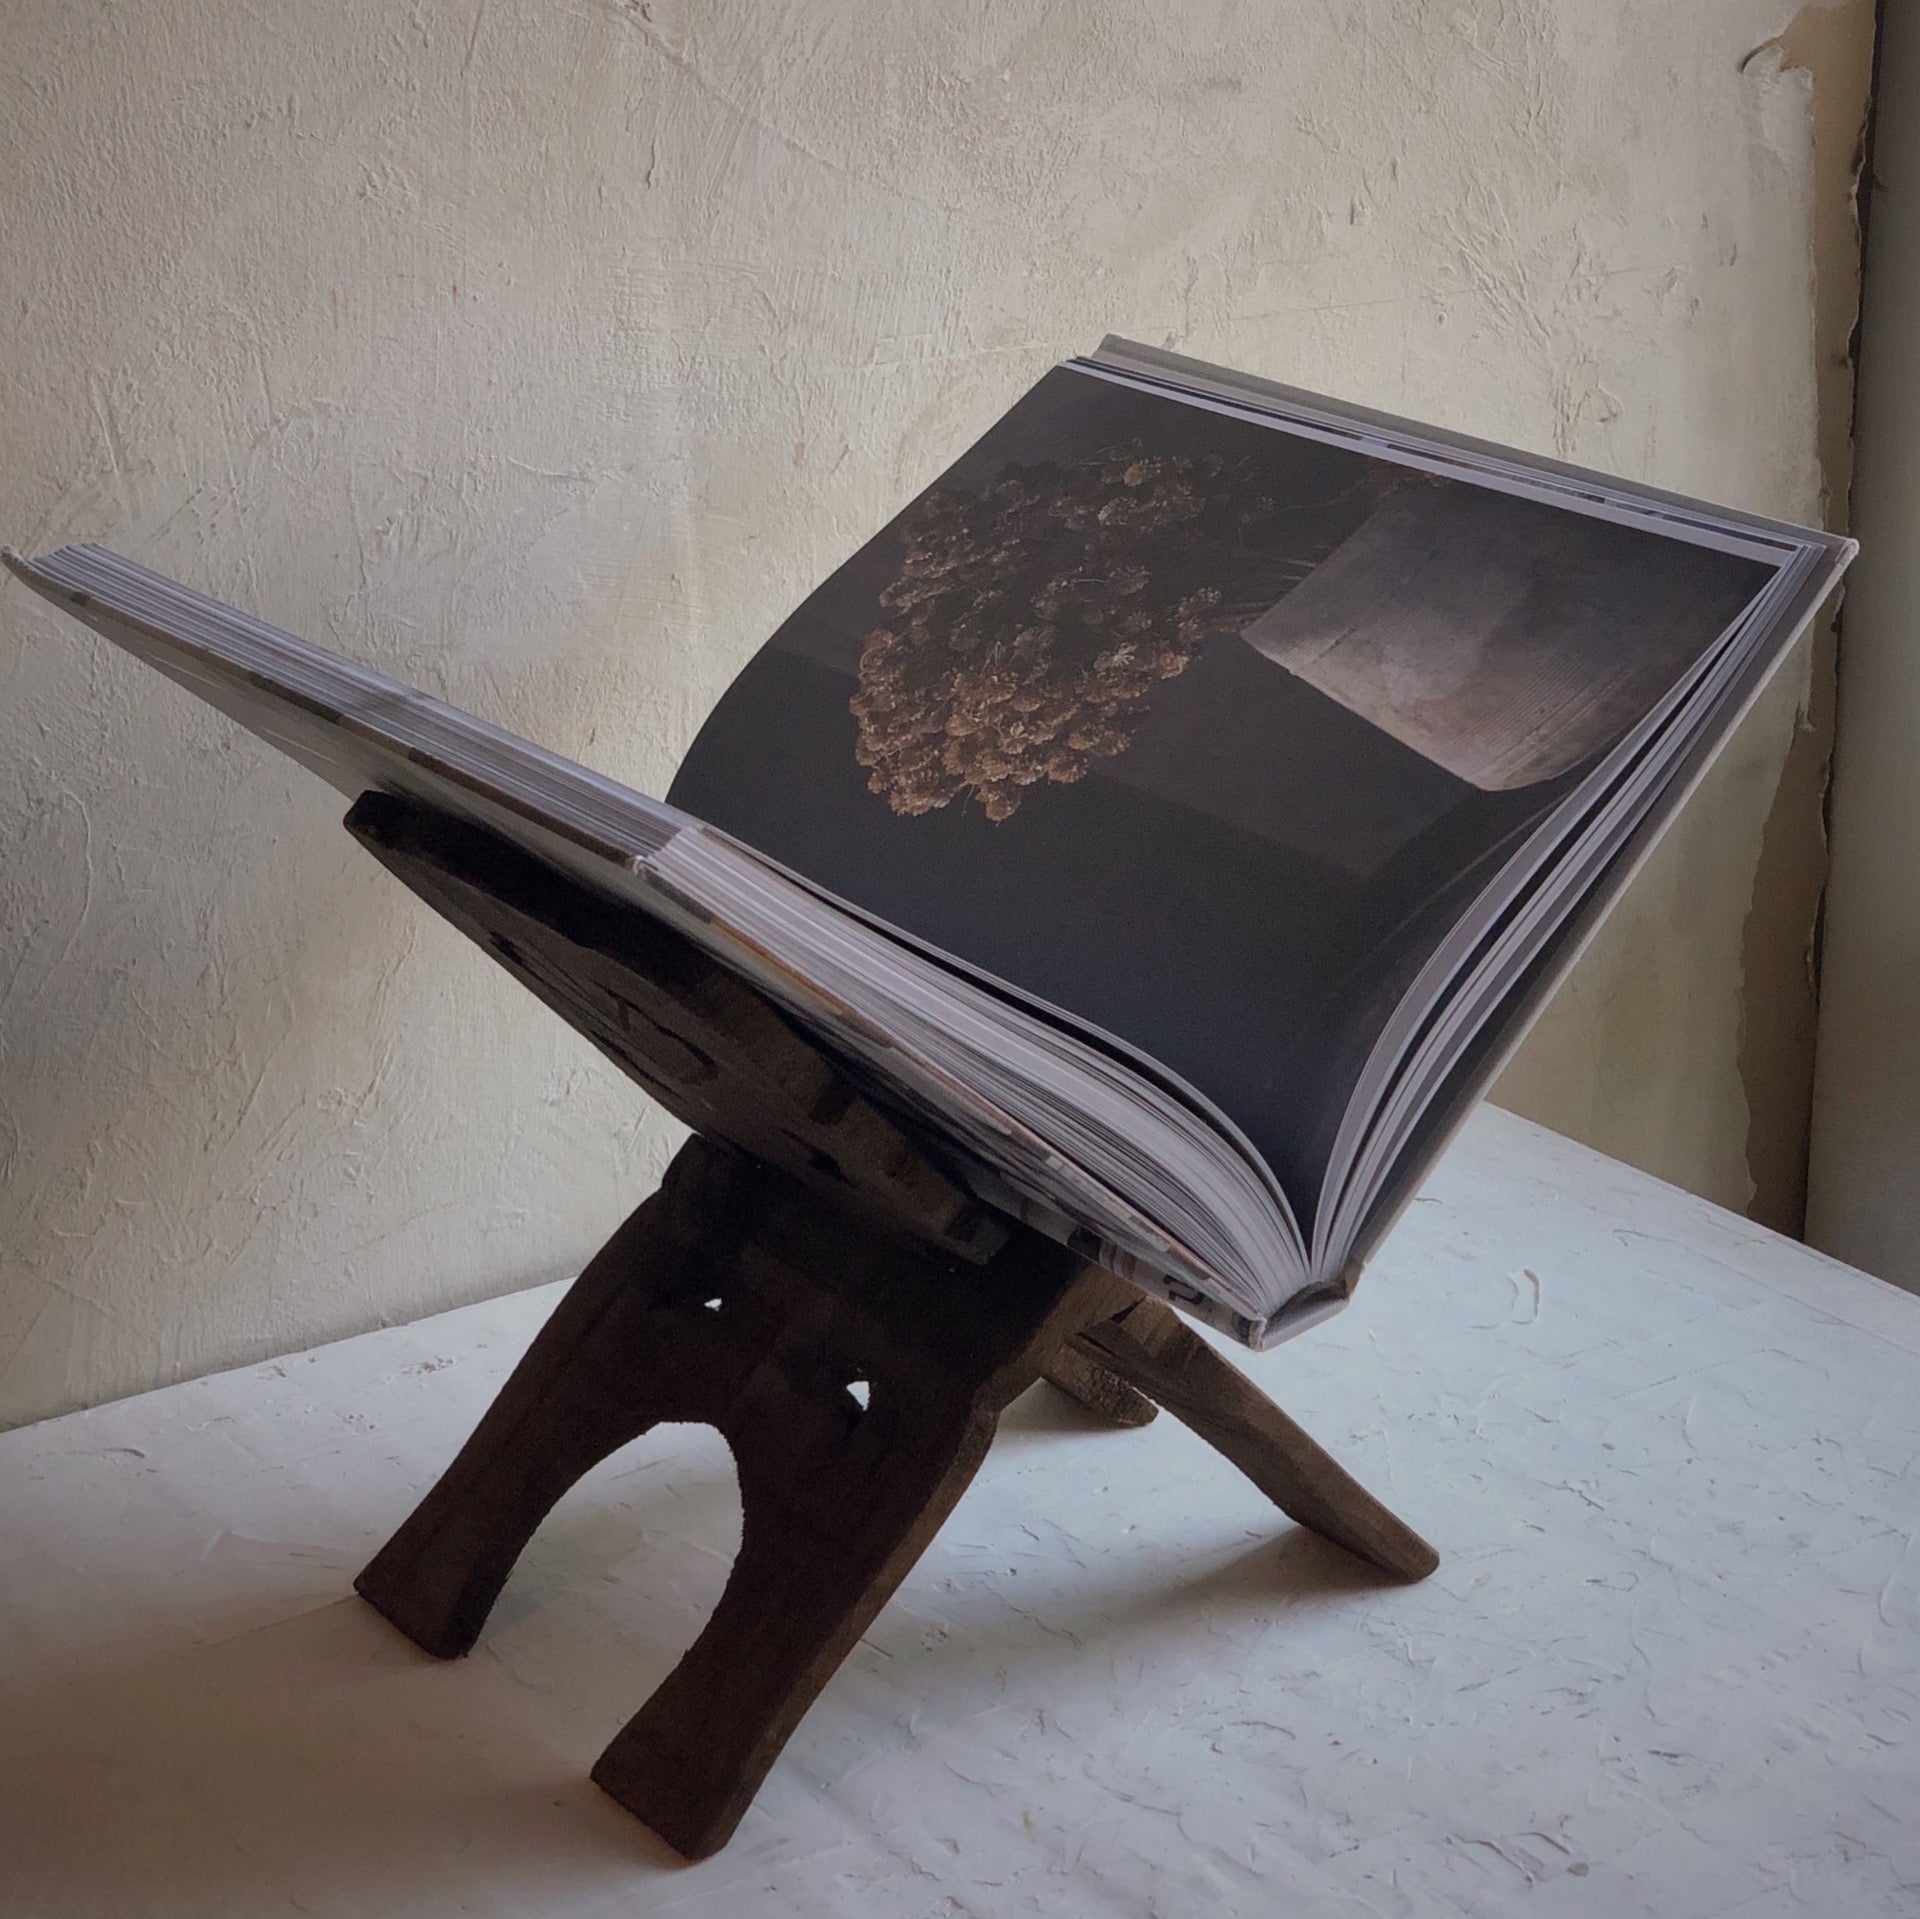 VINTAGE WOODEN BOOK STAND